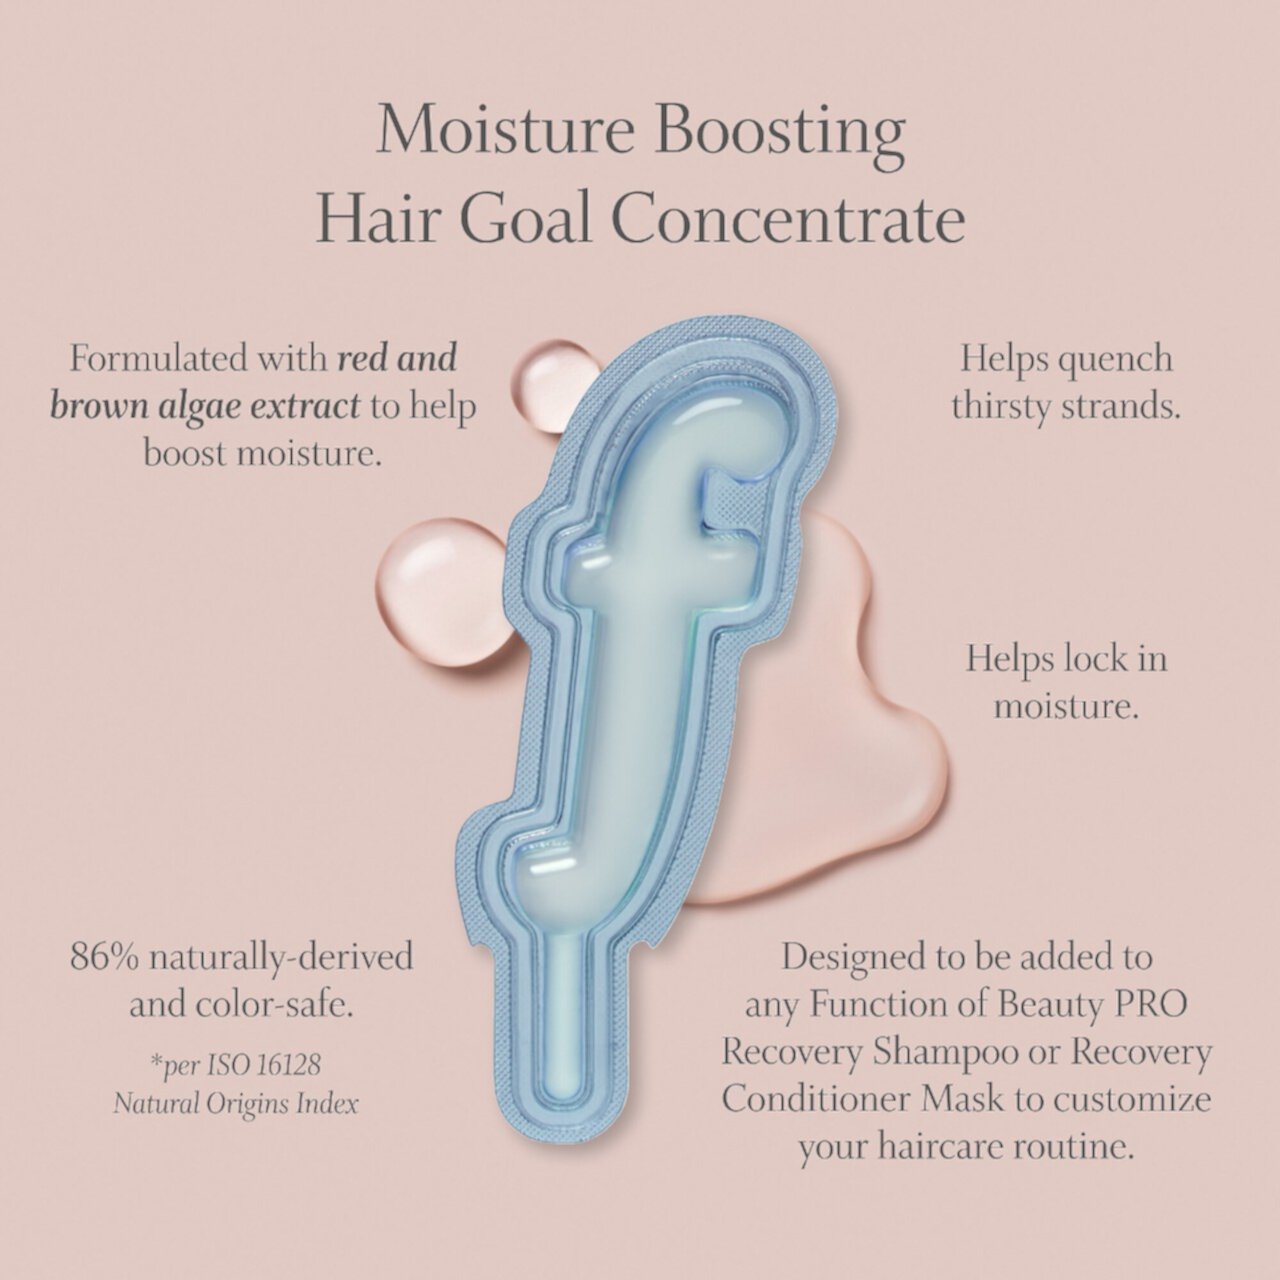 The Moisture Shot Hydrating Hair Goal Concentrate Mix-In Function of Beauty PRO